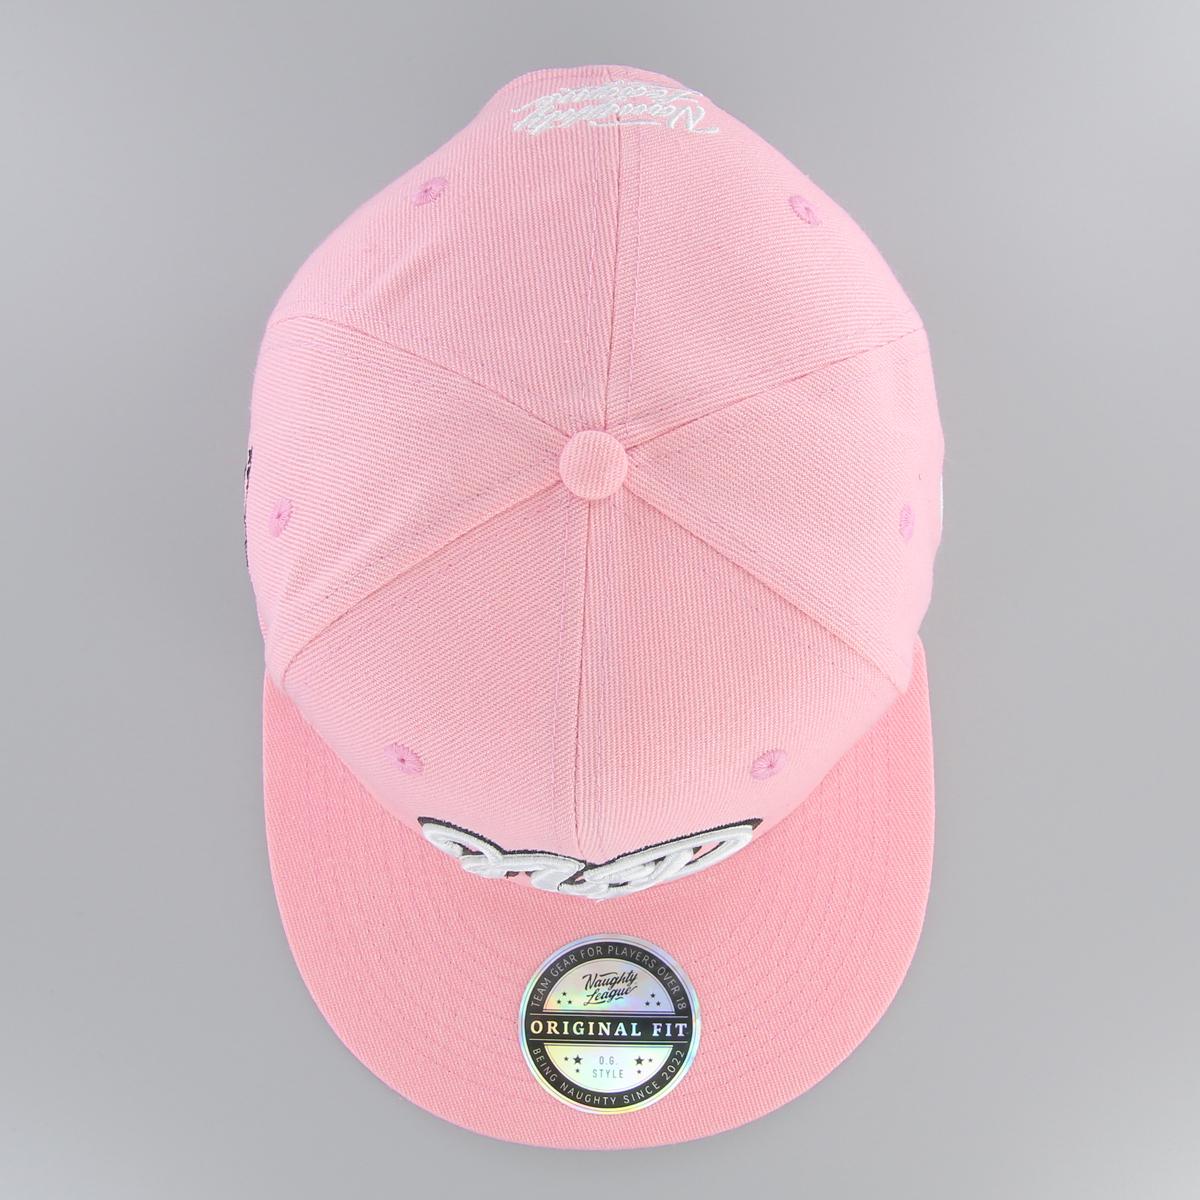 New York Notorious Pigs Snapback Baby Pink